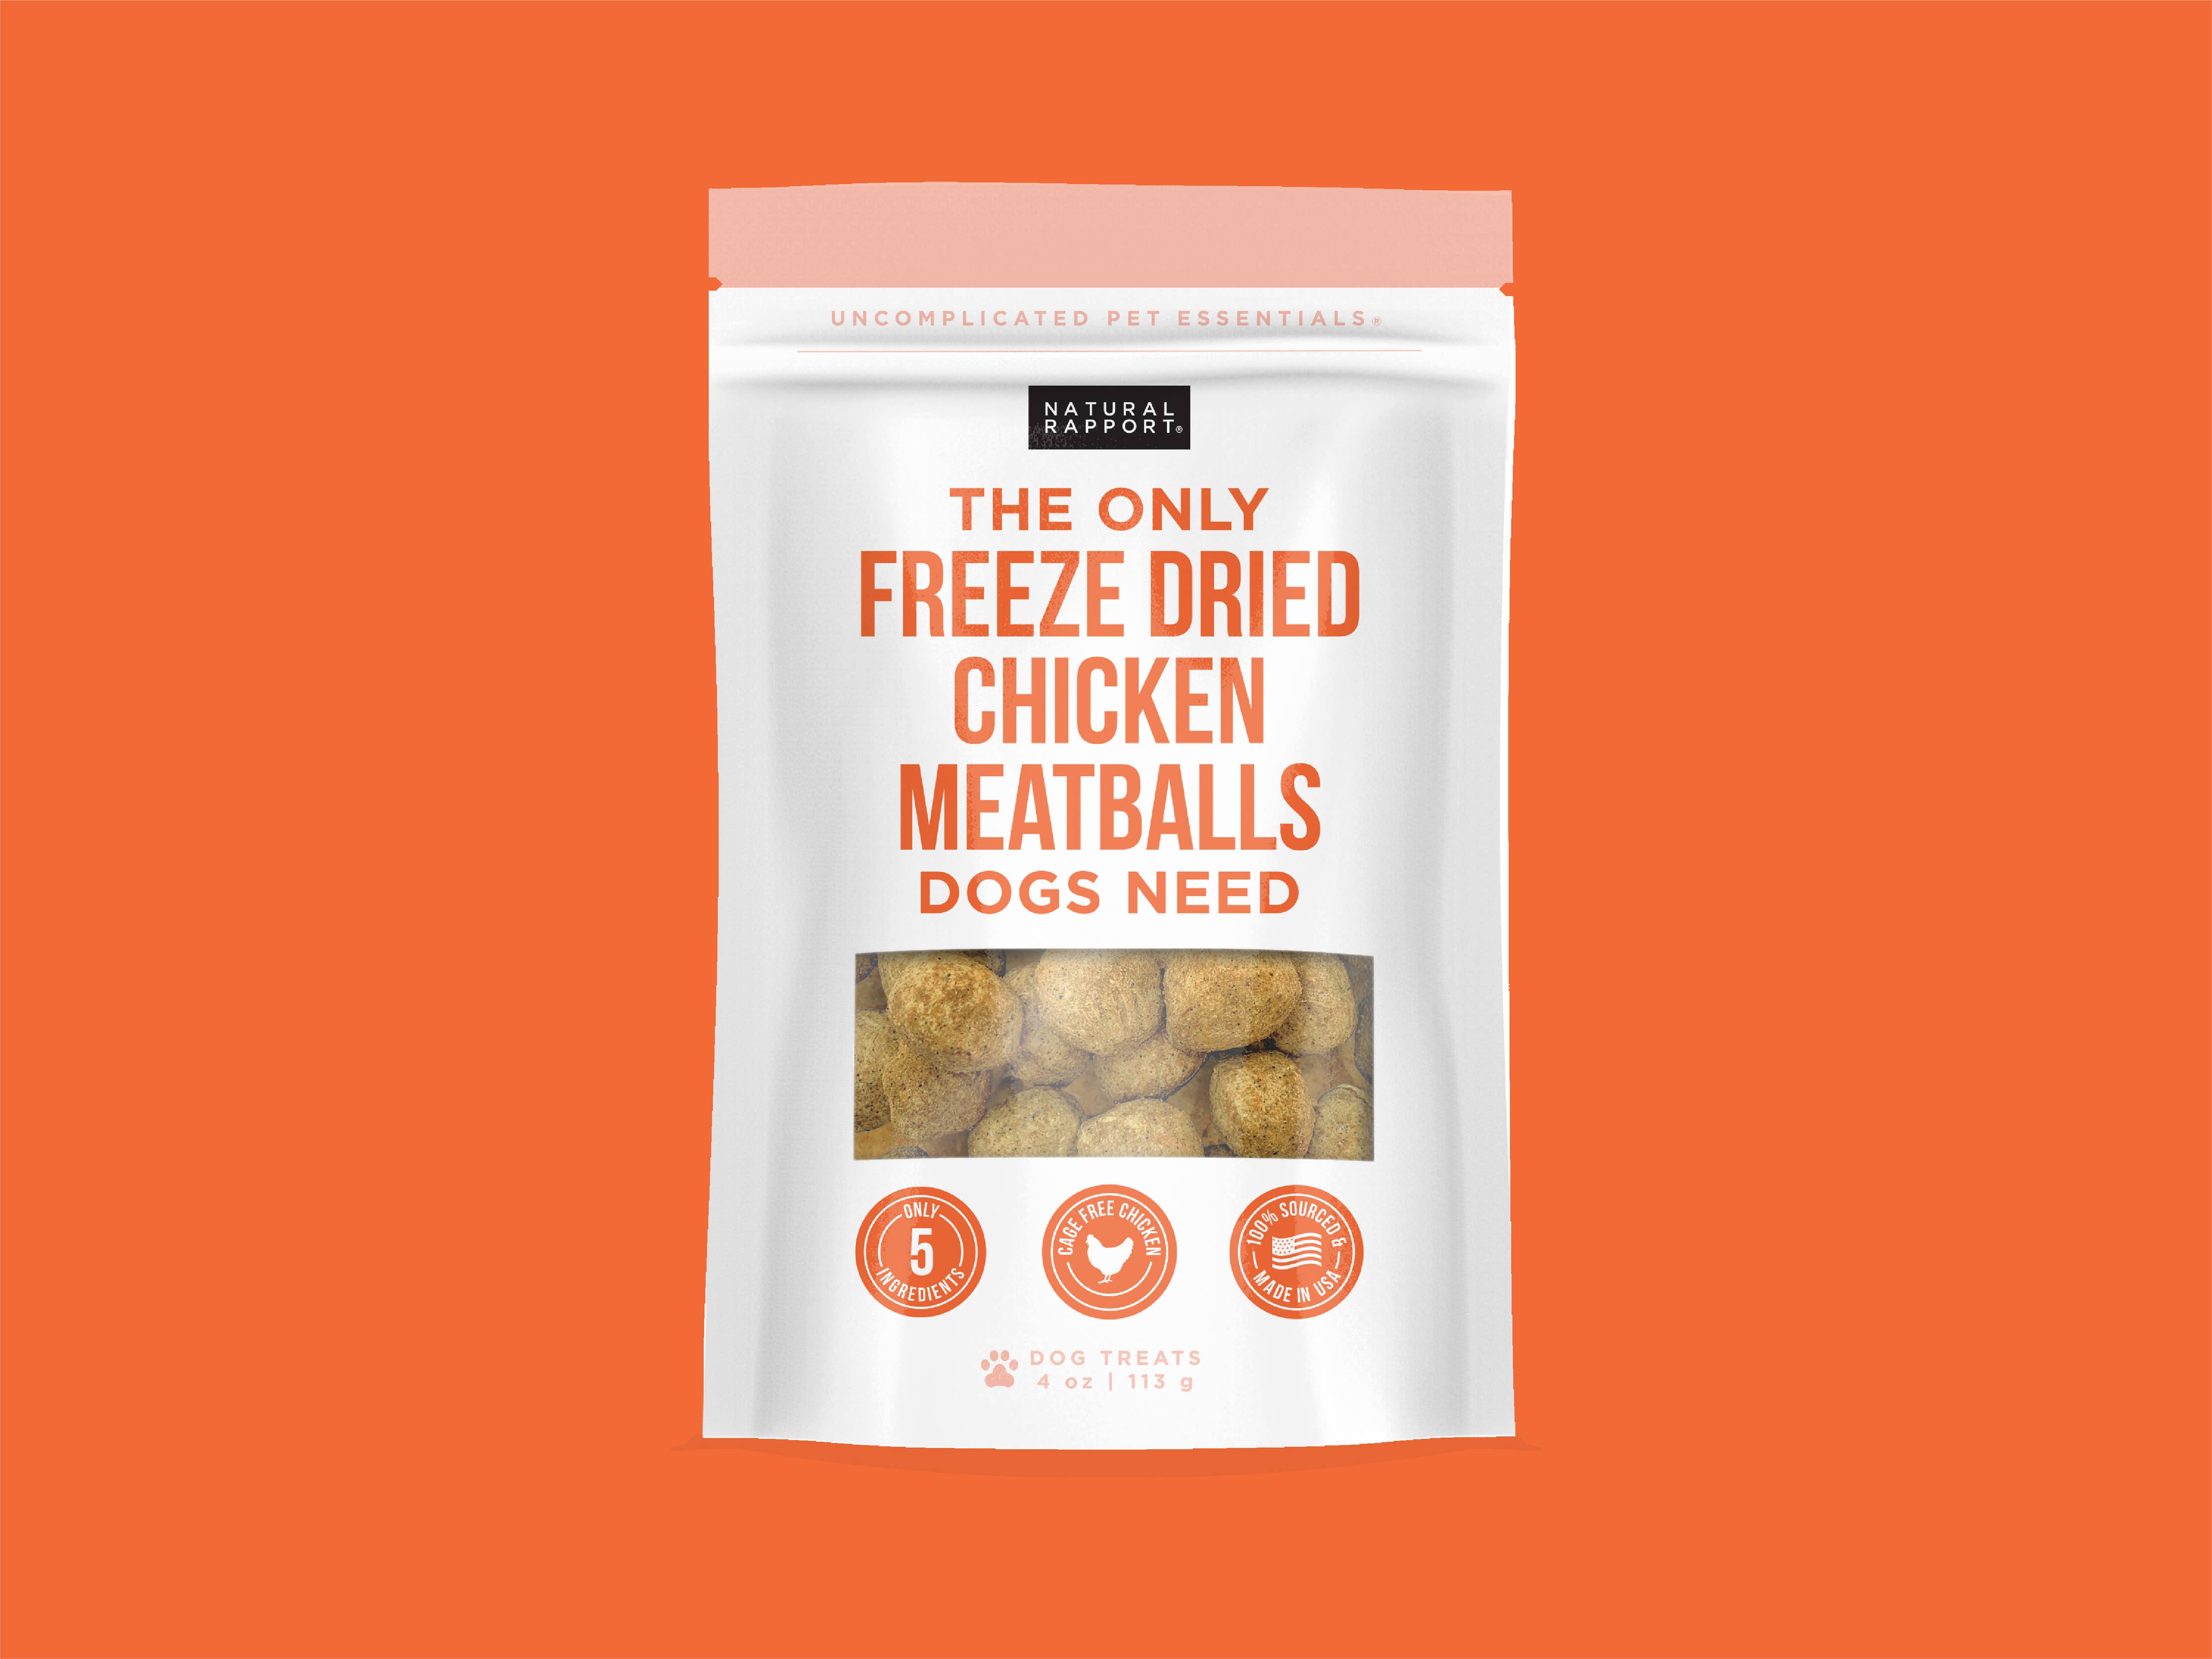 Natural Rapport - The Only Freeze Dried Chicken Meatballs Dogs Need